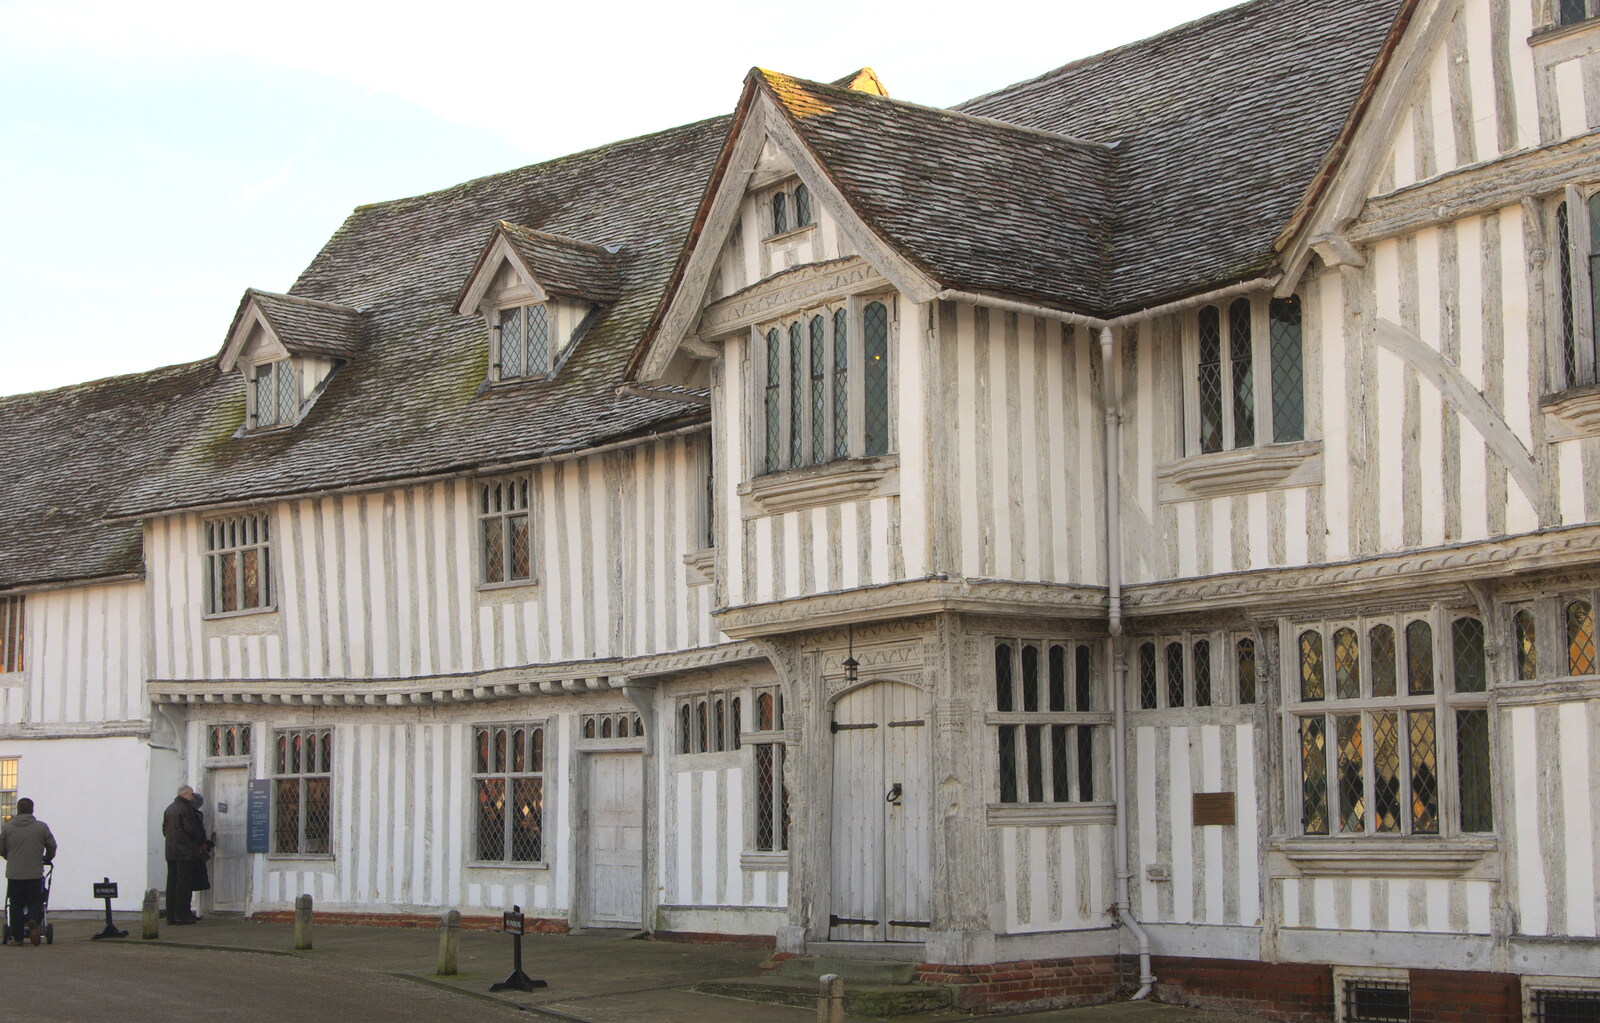 Lavenham Guildhall from A Day in Lavenham, Suffolk - 22nd January 2017